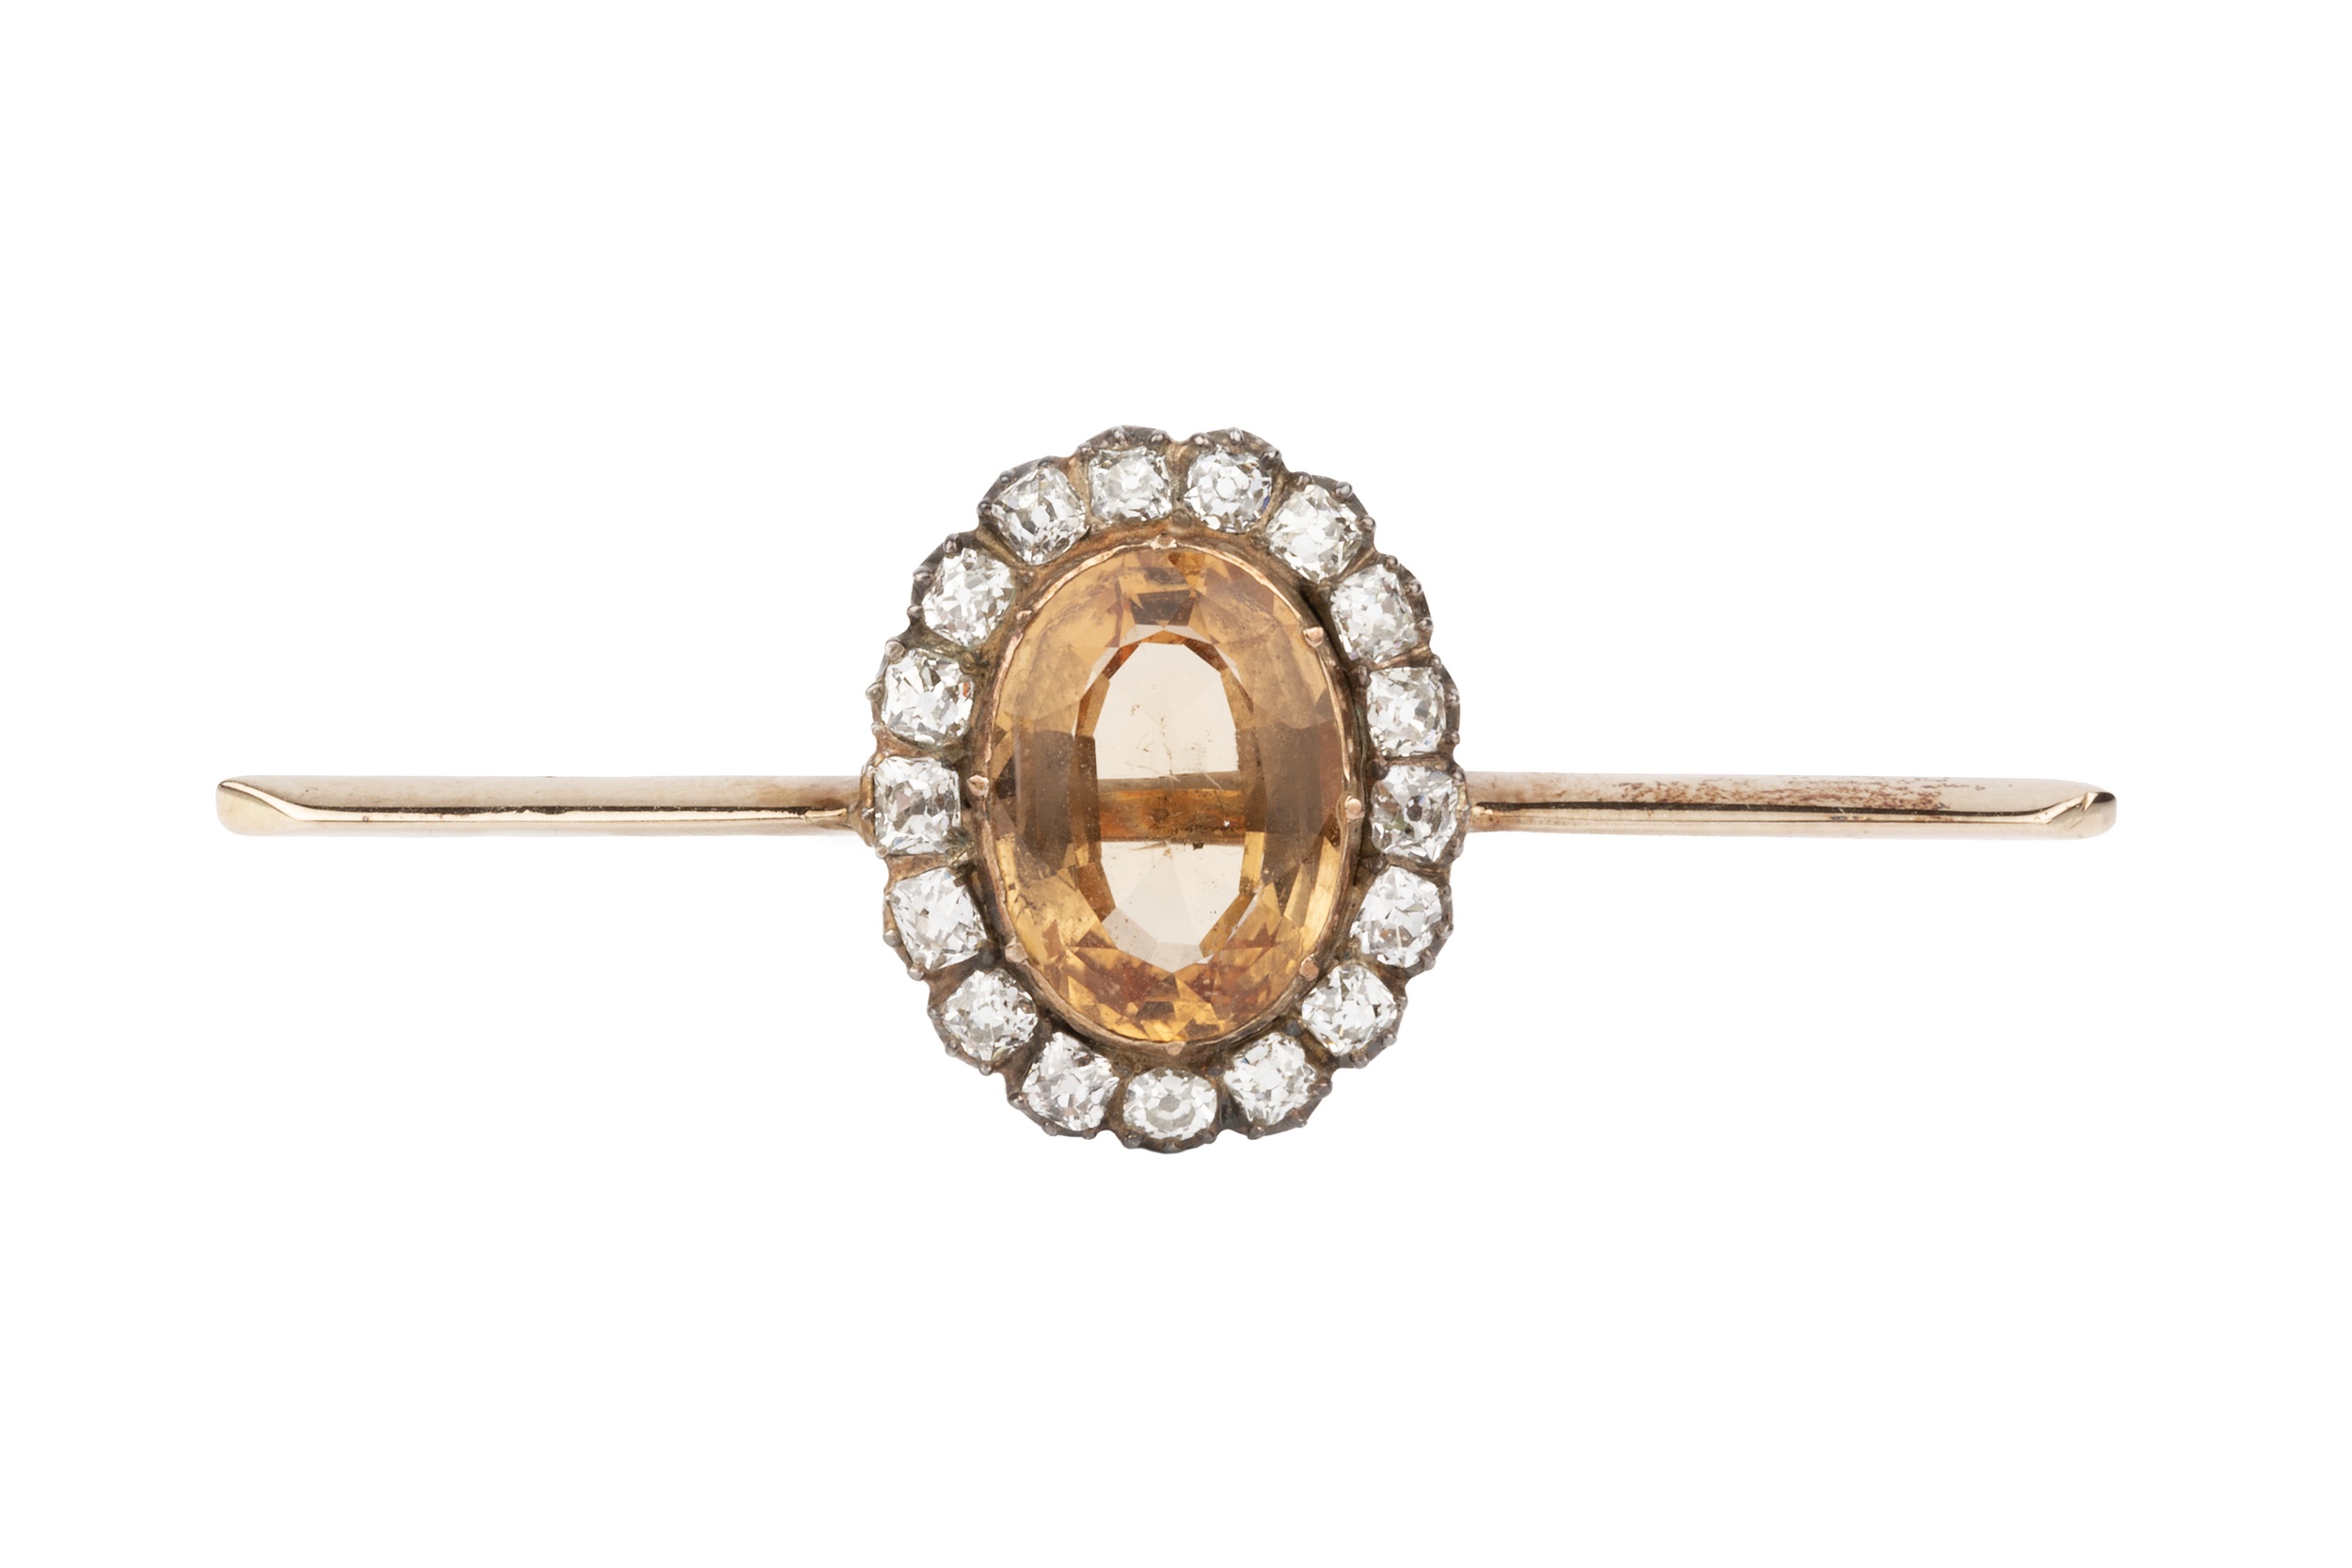 A topaz and diamond mounted bar brooch, the oval orange-brown stone within a border of seventeen